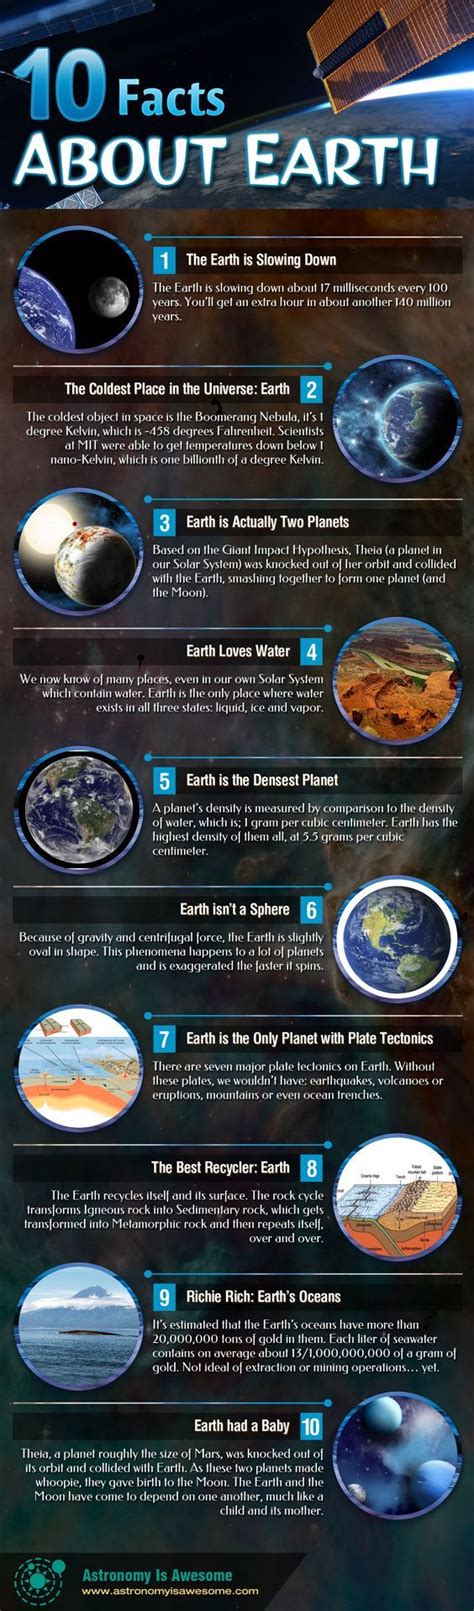 10 Facts About Earth Infographic Earth Science Facts About Earth